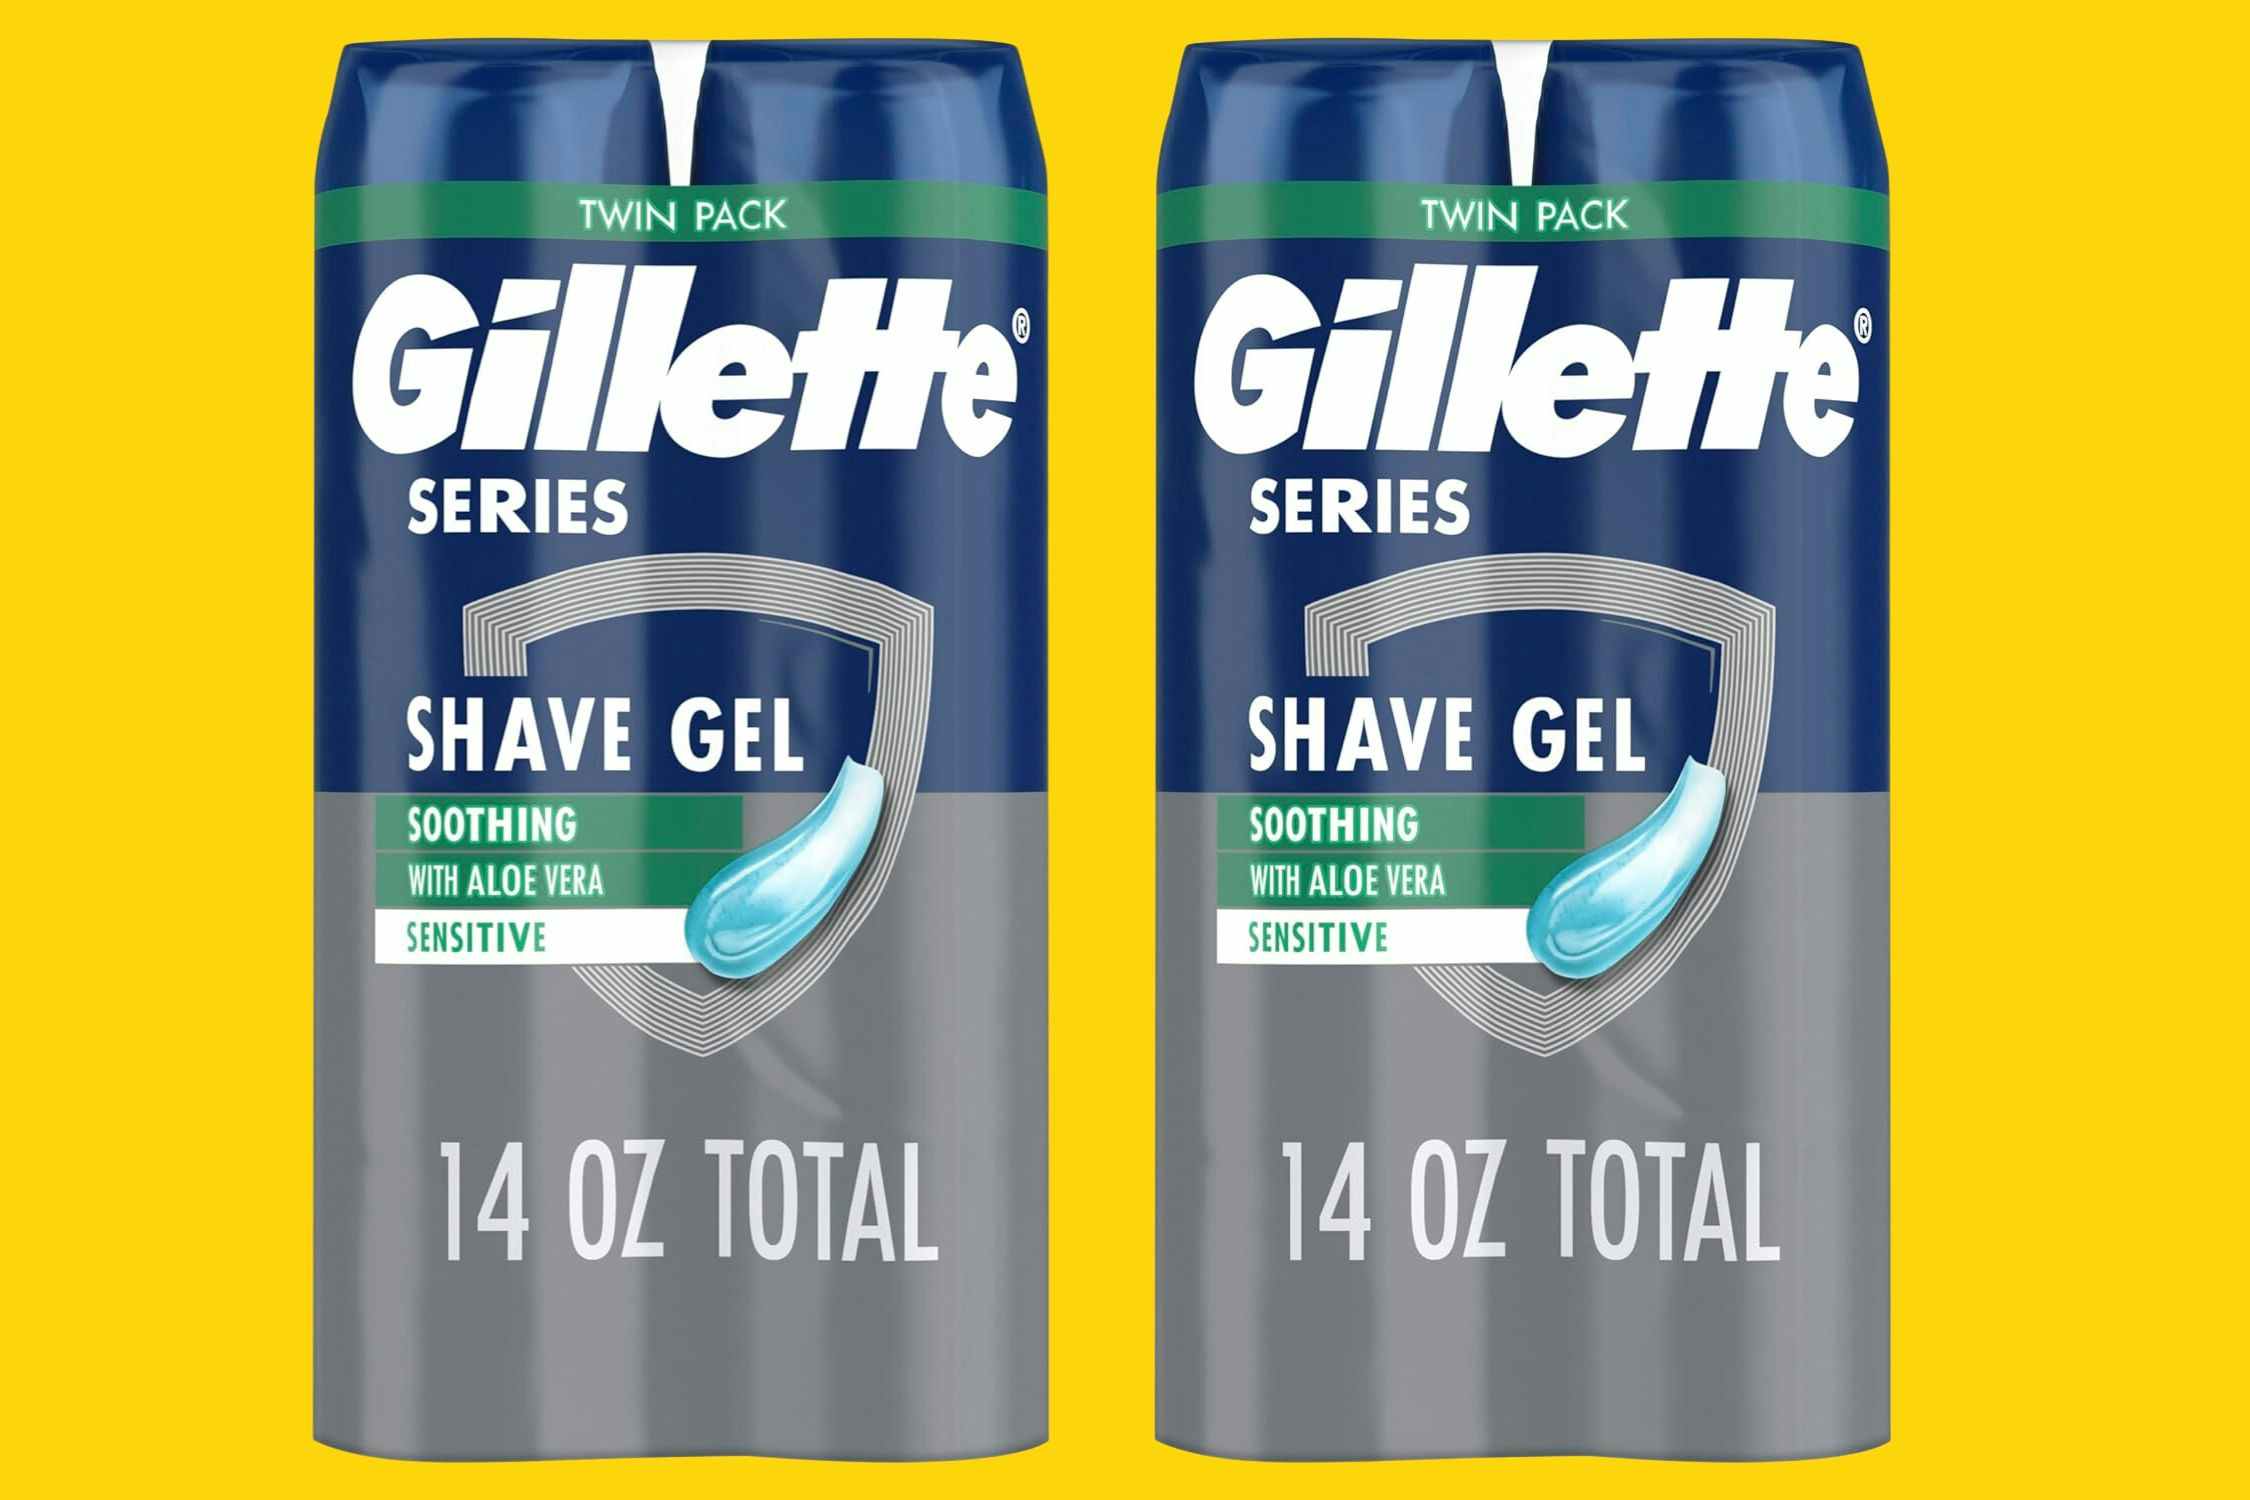 Gillette Shave Gel: Get 4 Cans for $8.35 on Amazon